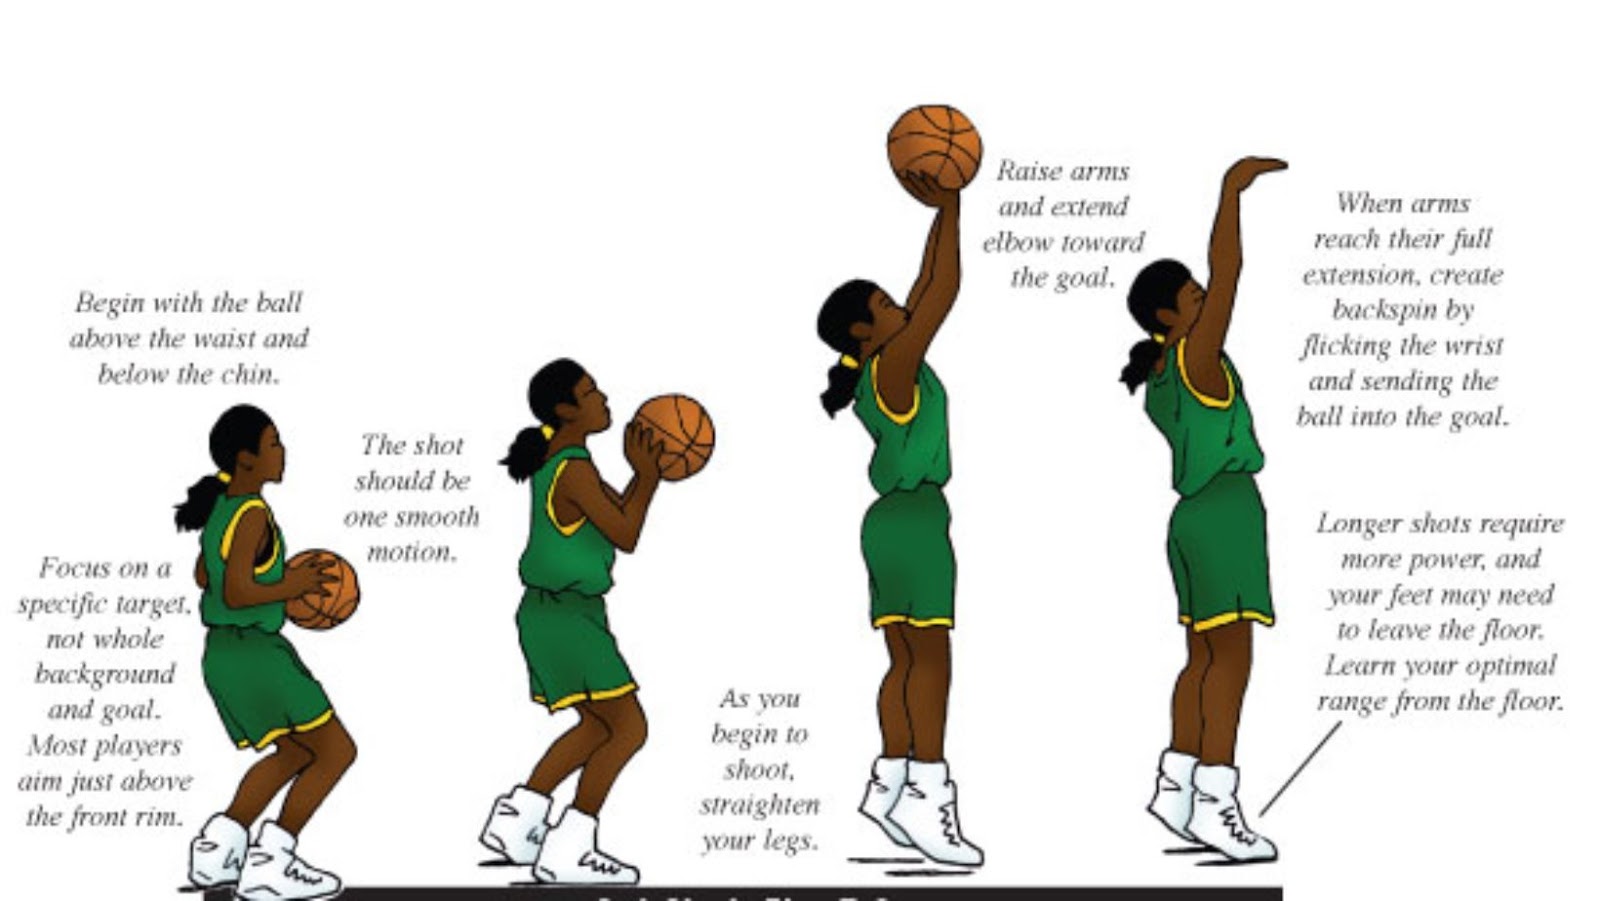 The ultimate guide to making better shots in basketball